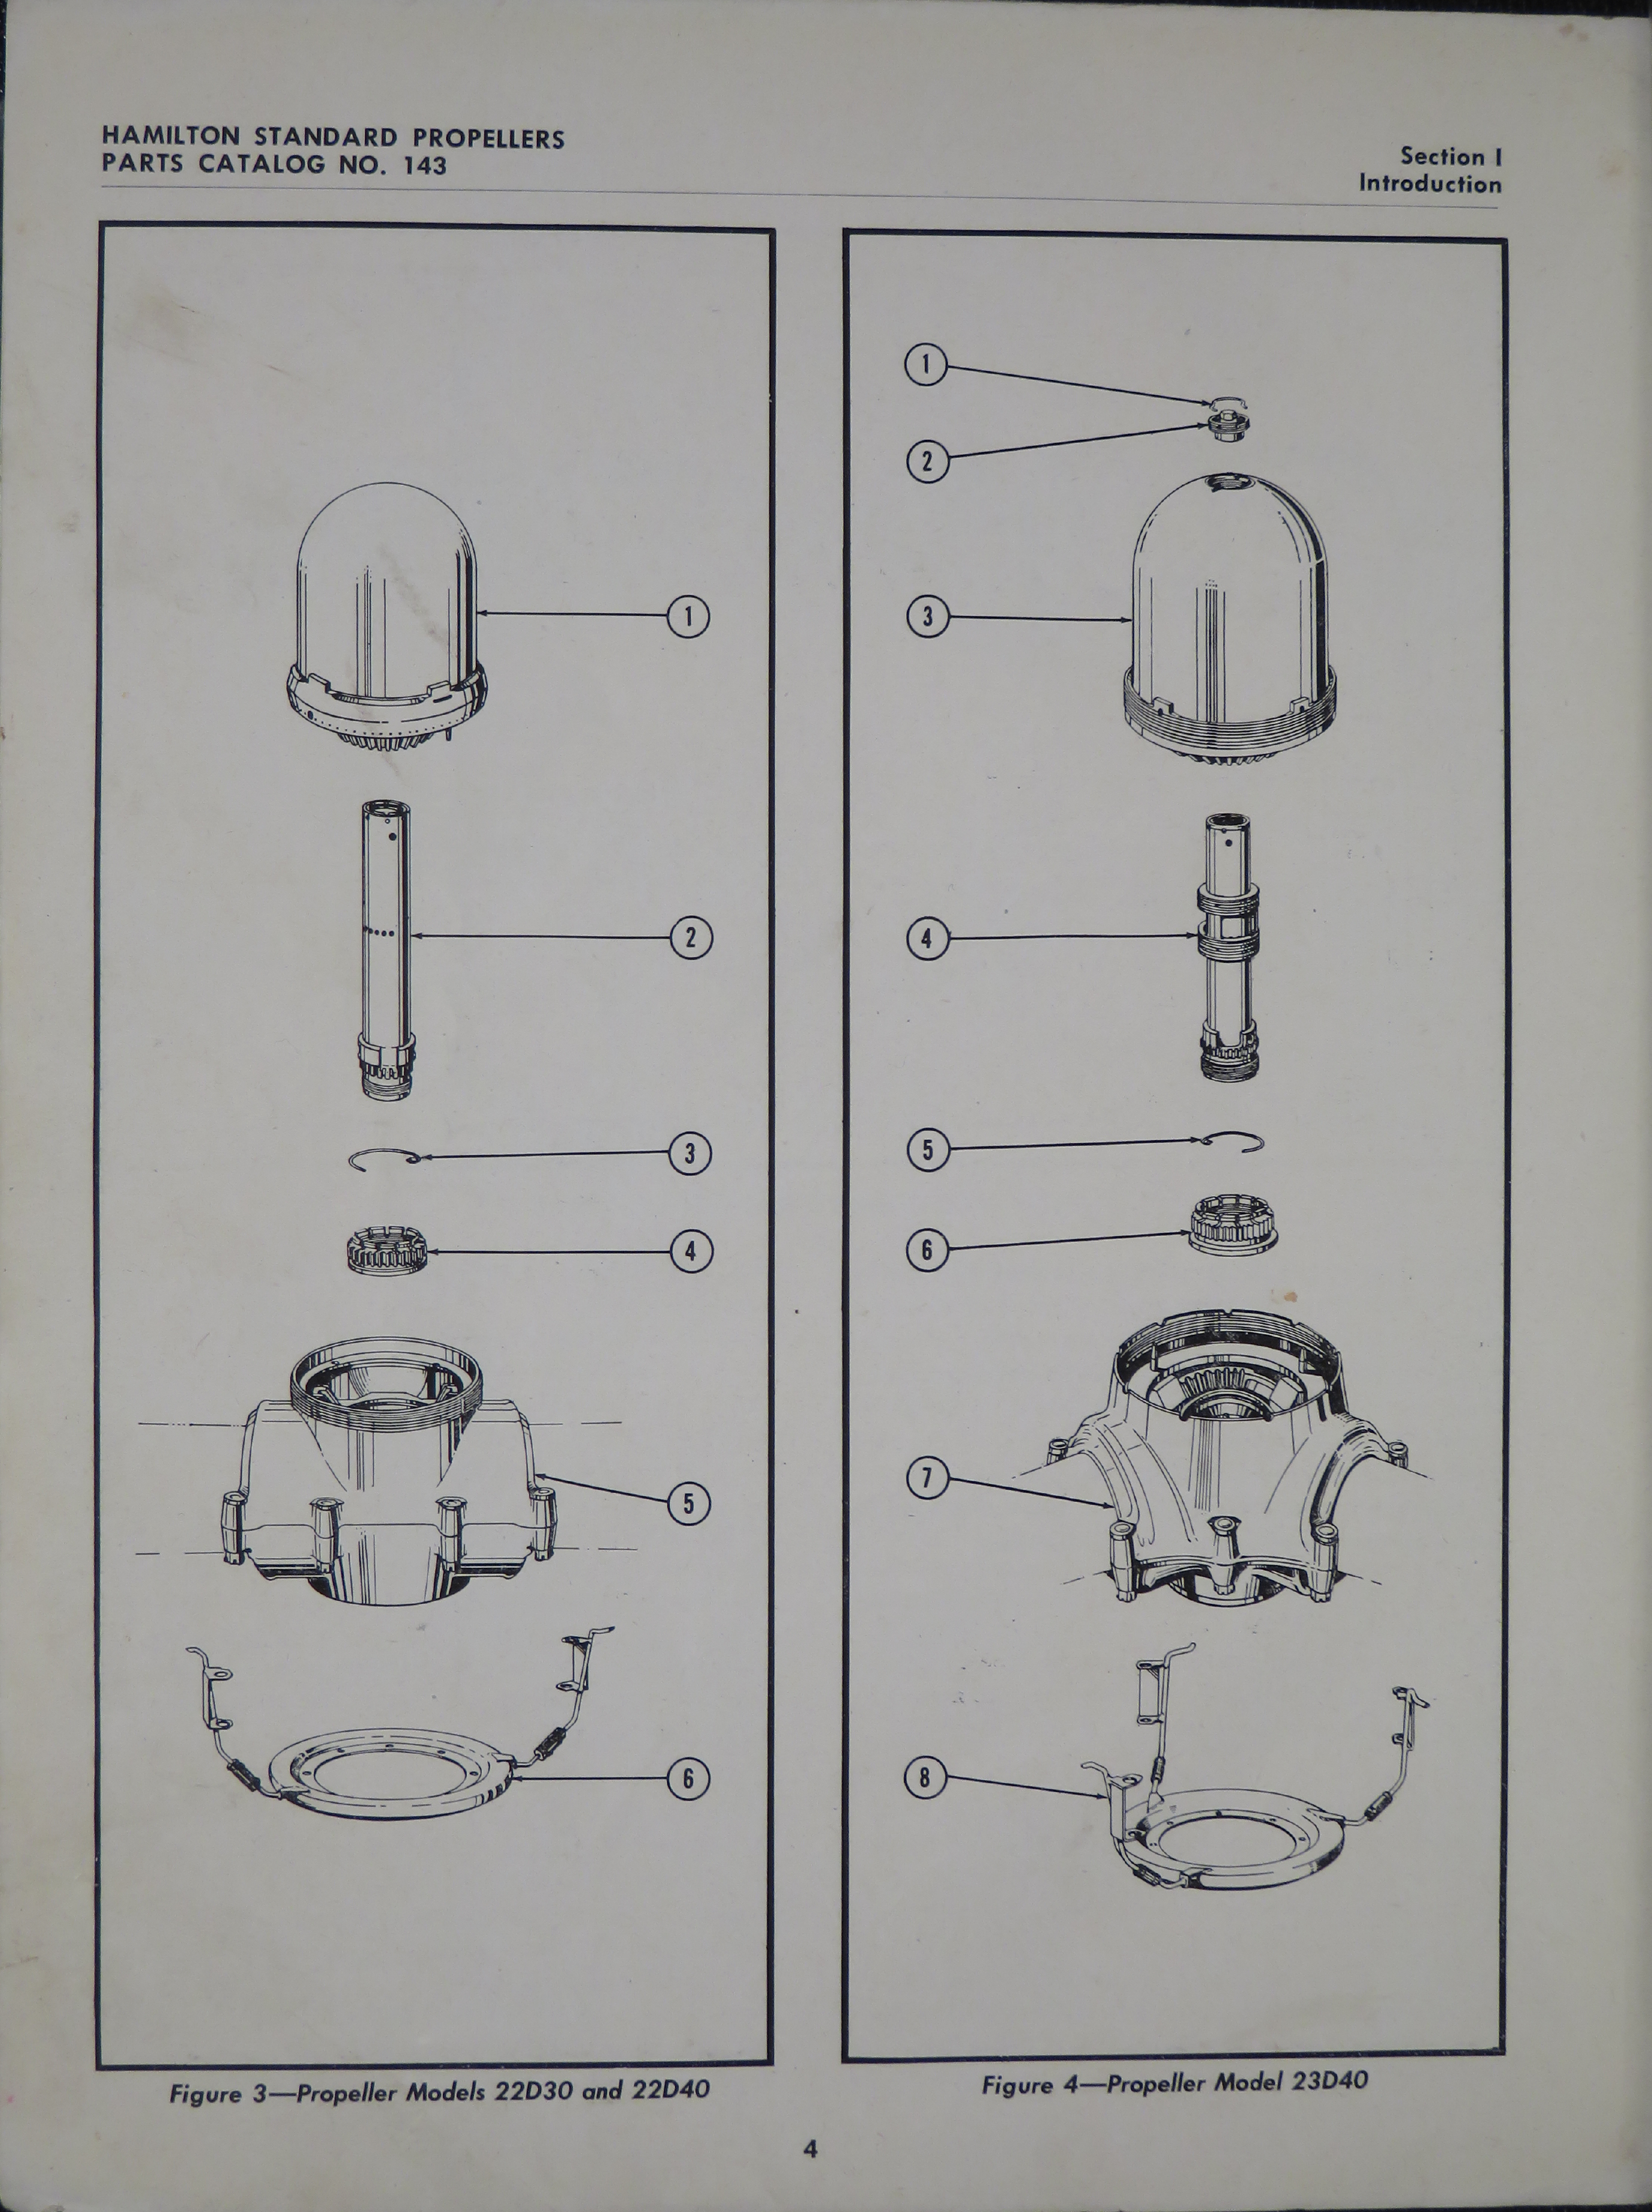 Sample page 6 from AirCorps Library document: Parts Catalog for Quick-Feathering Hydromatic Propellers